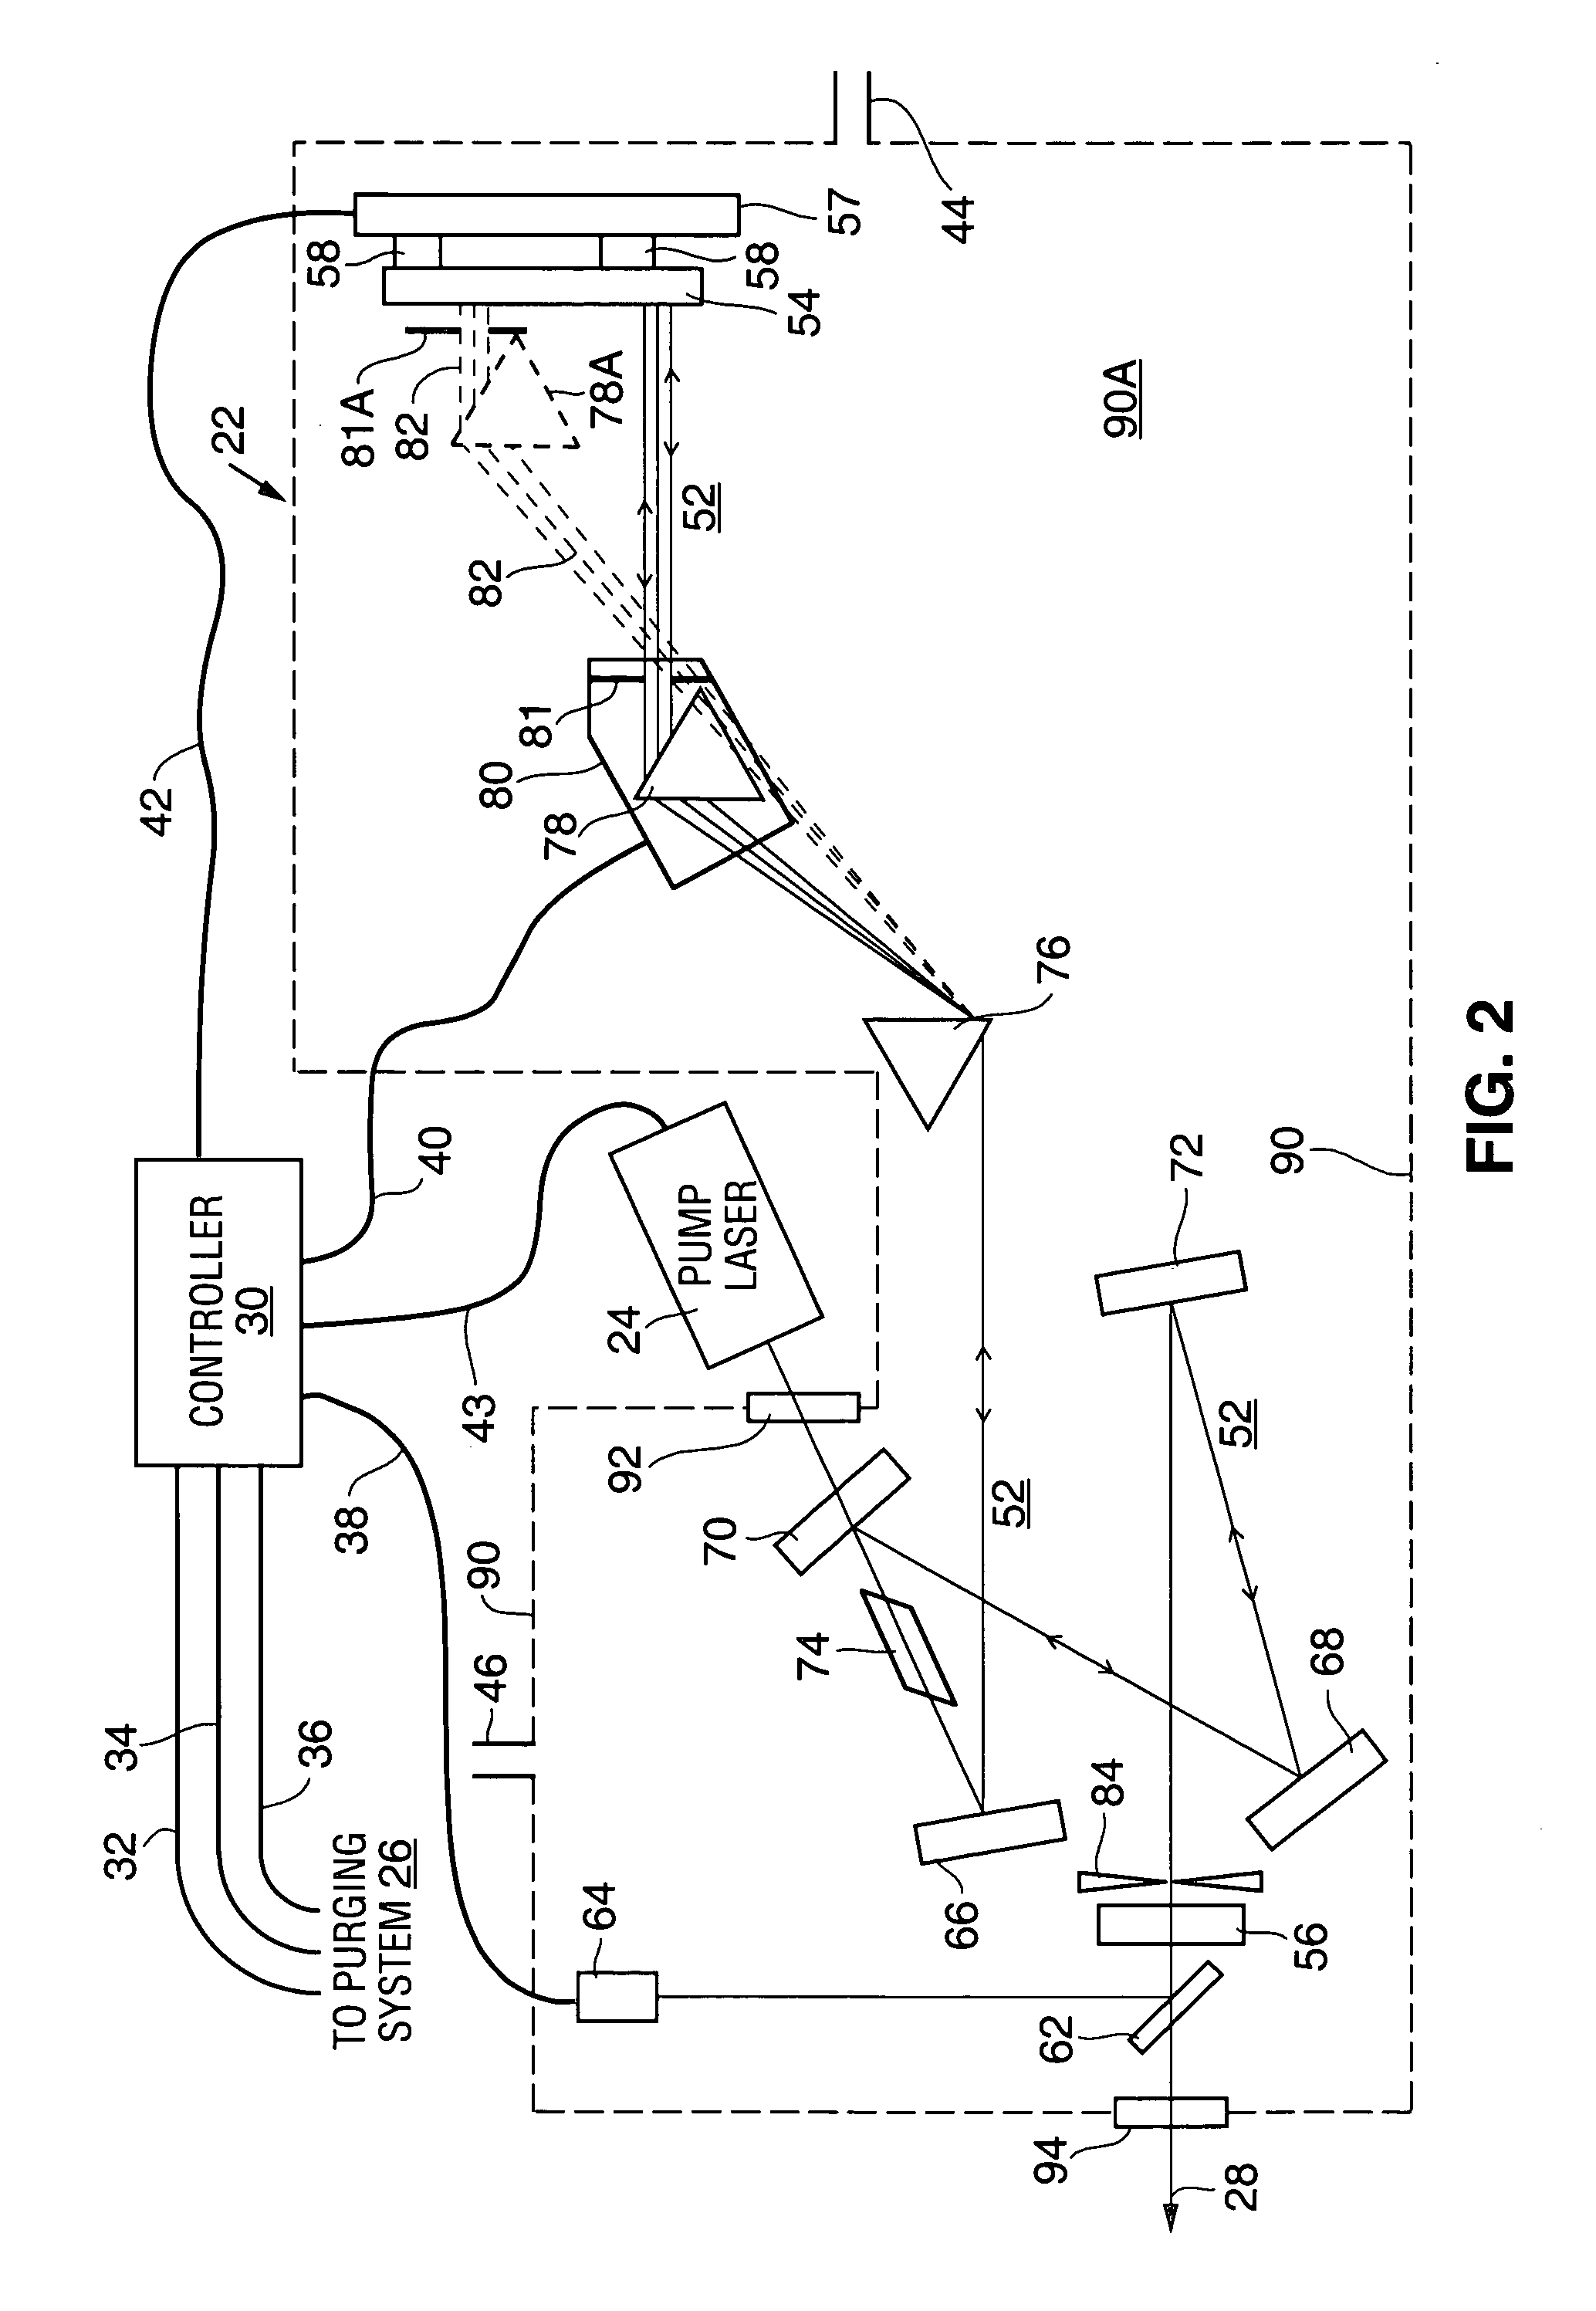 Closed-loop purging system for laser